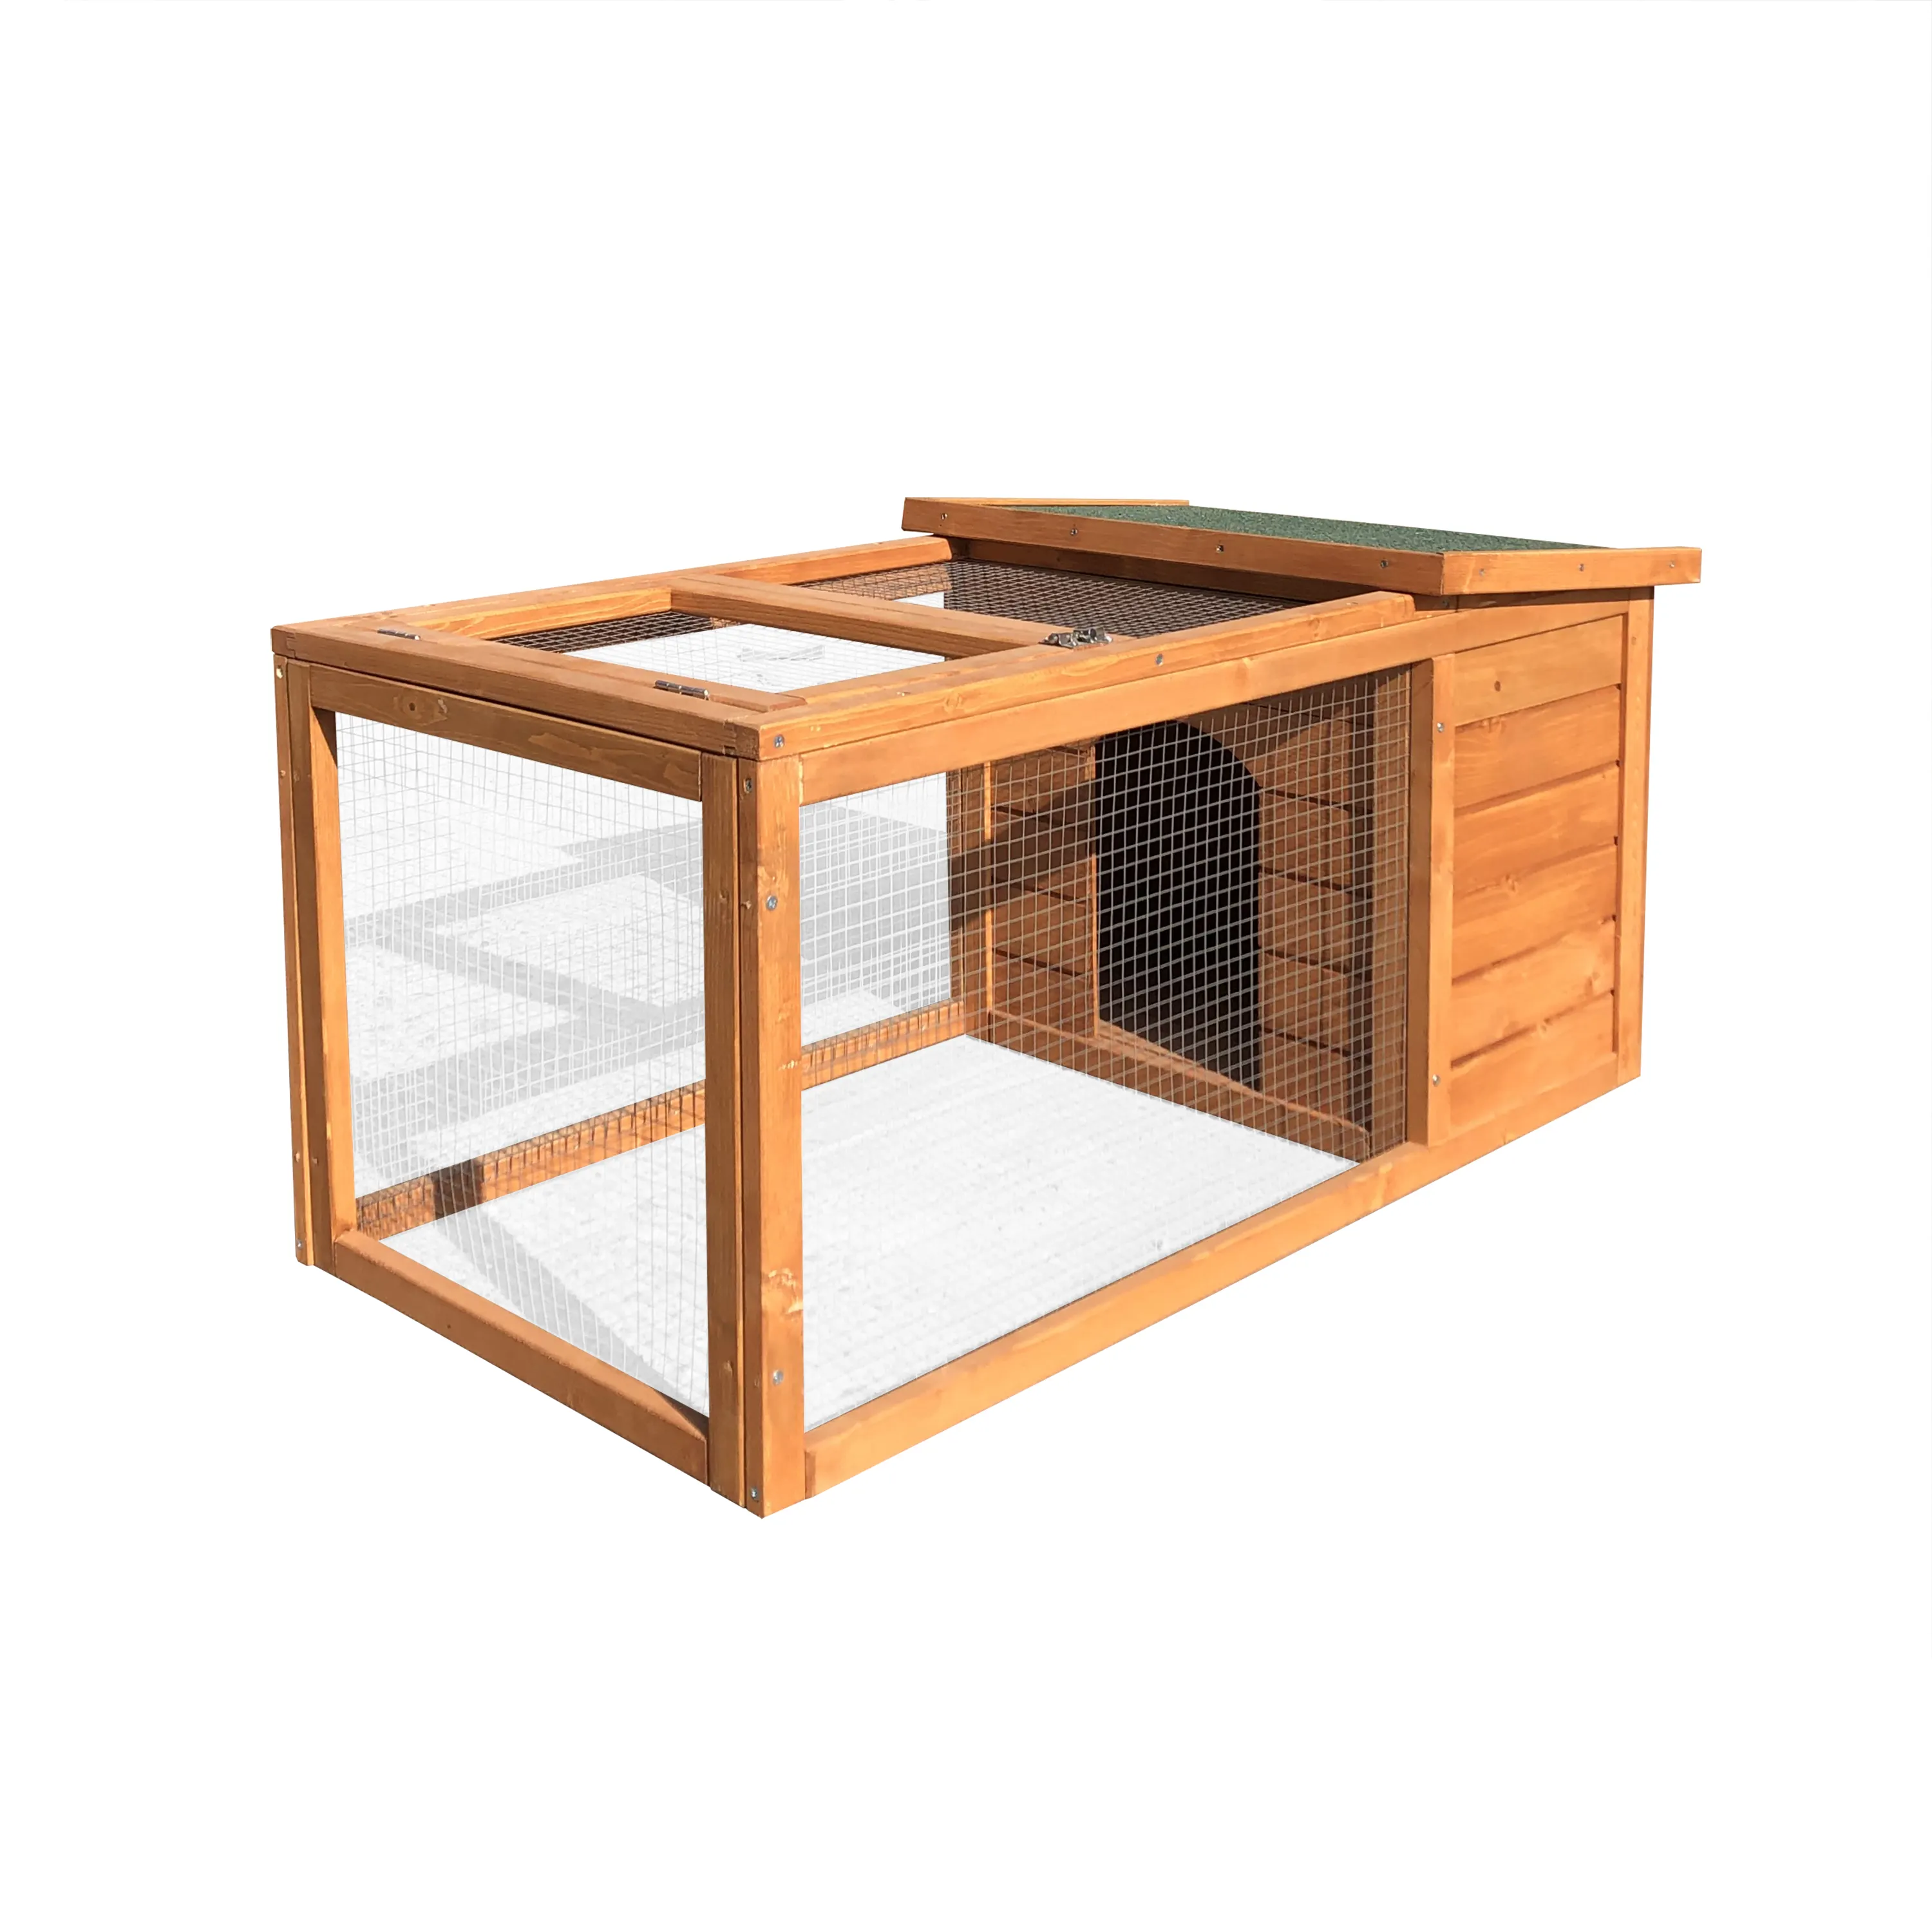 Cage Wholesale Cute Little Bunny House Backyard Rabbit House Guinea Pig Hutch Cages For Rabbits For Sale